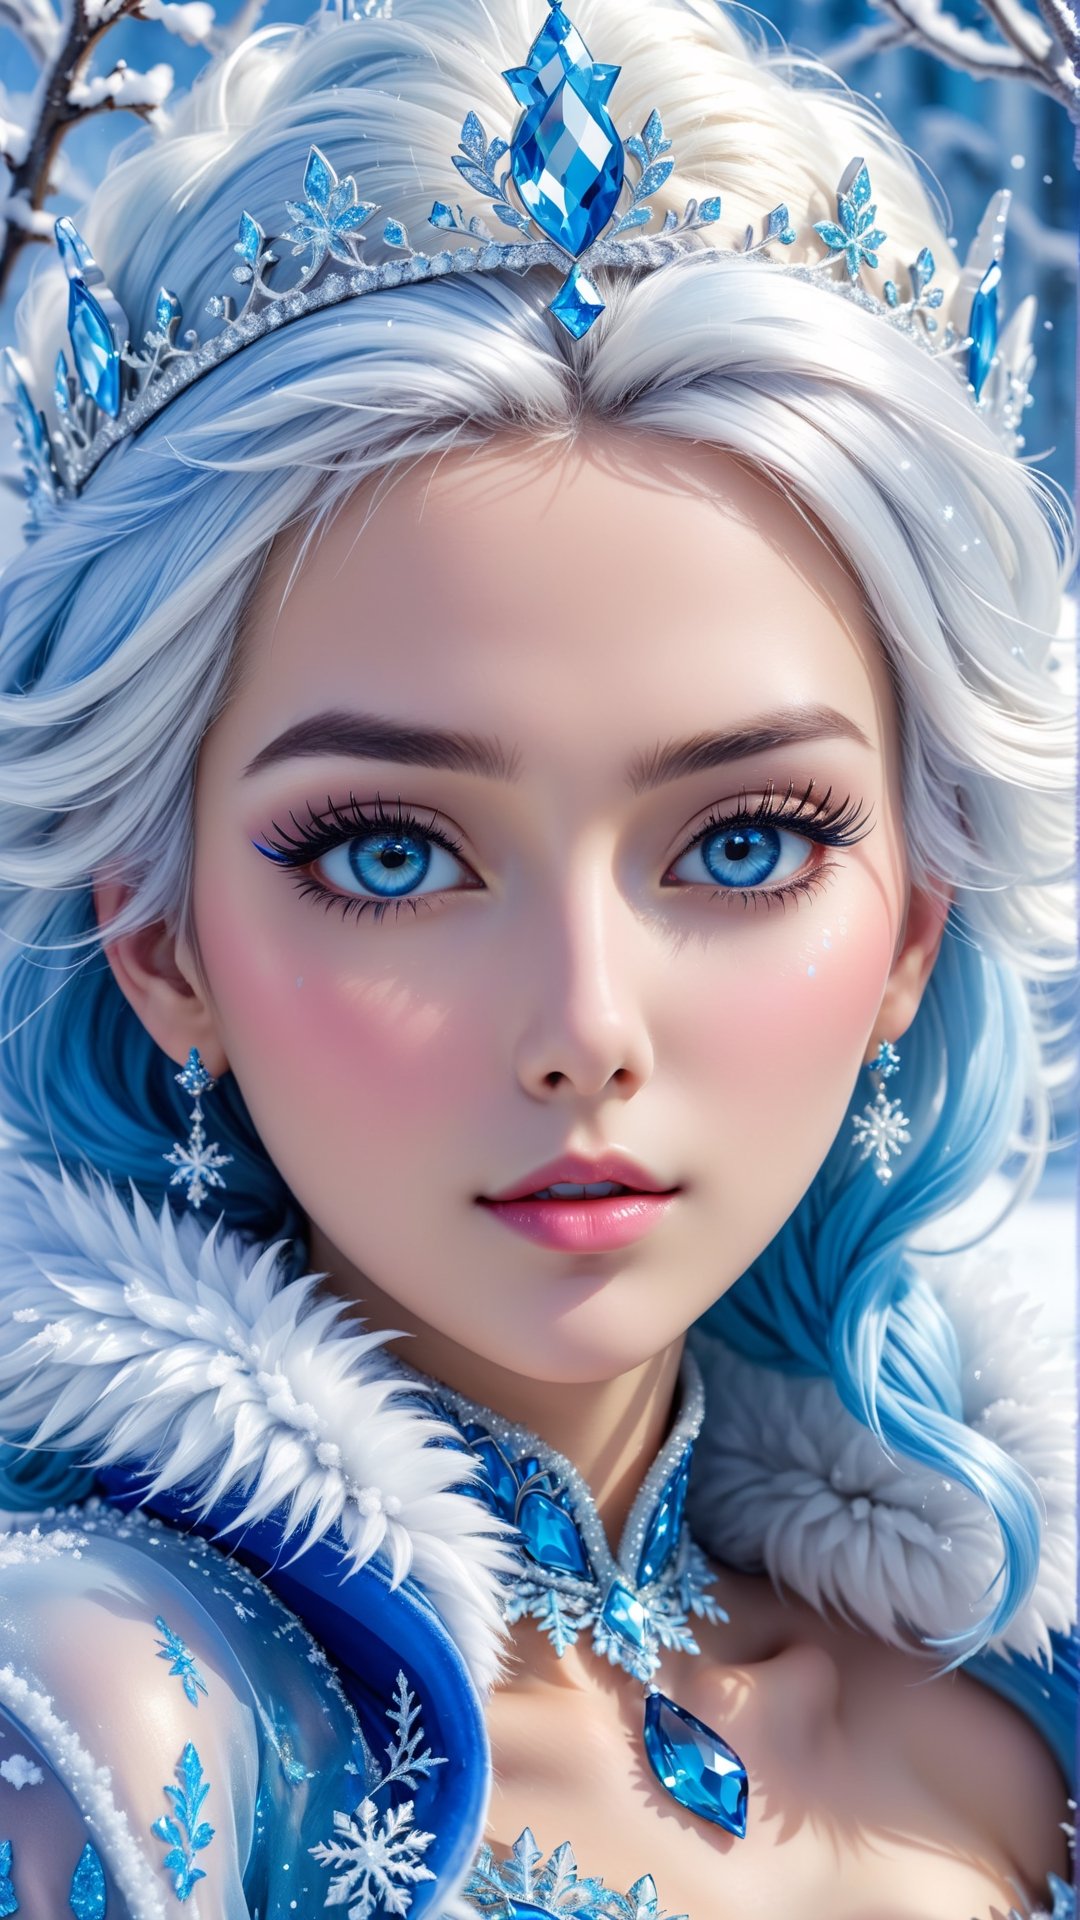 FrostedStyle, up close photo of a fierce and beautiful snow queen, blue and white hair, frosted lips, wearing a frozen transparent glass fur coat, eyelashes tinged with frost, beautiful detailed high quality tiara, realistic eyes, up close, bokeh, 4k, HDR,shuicai